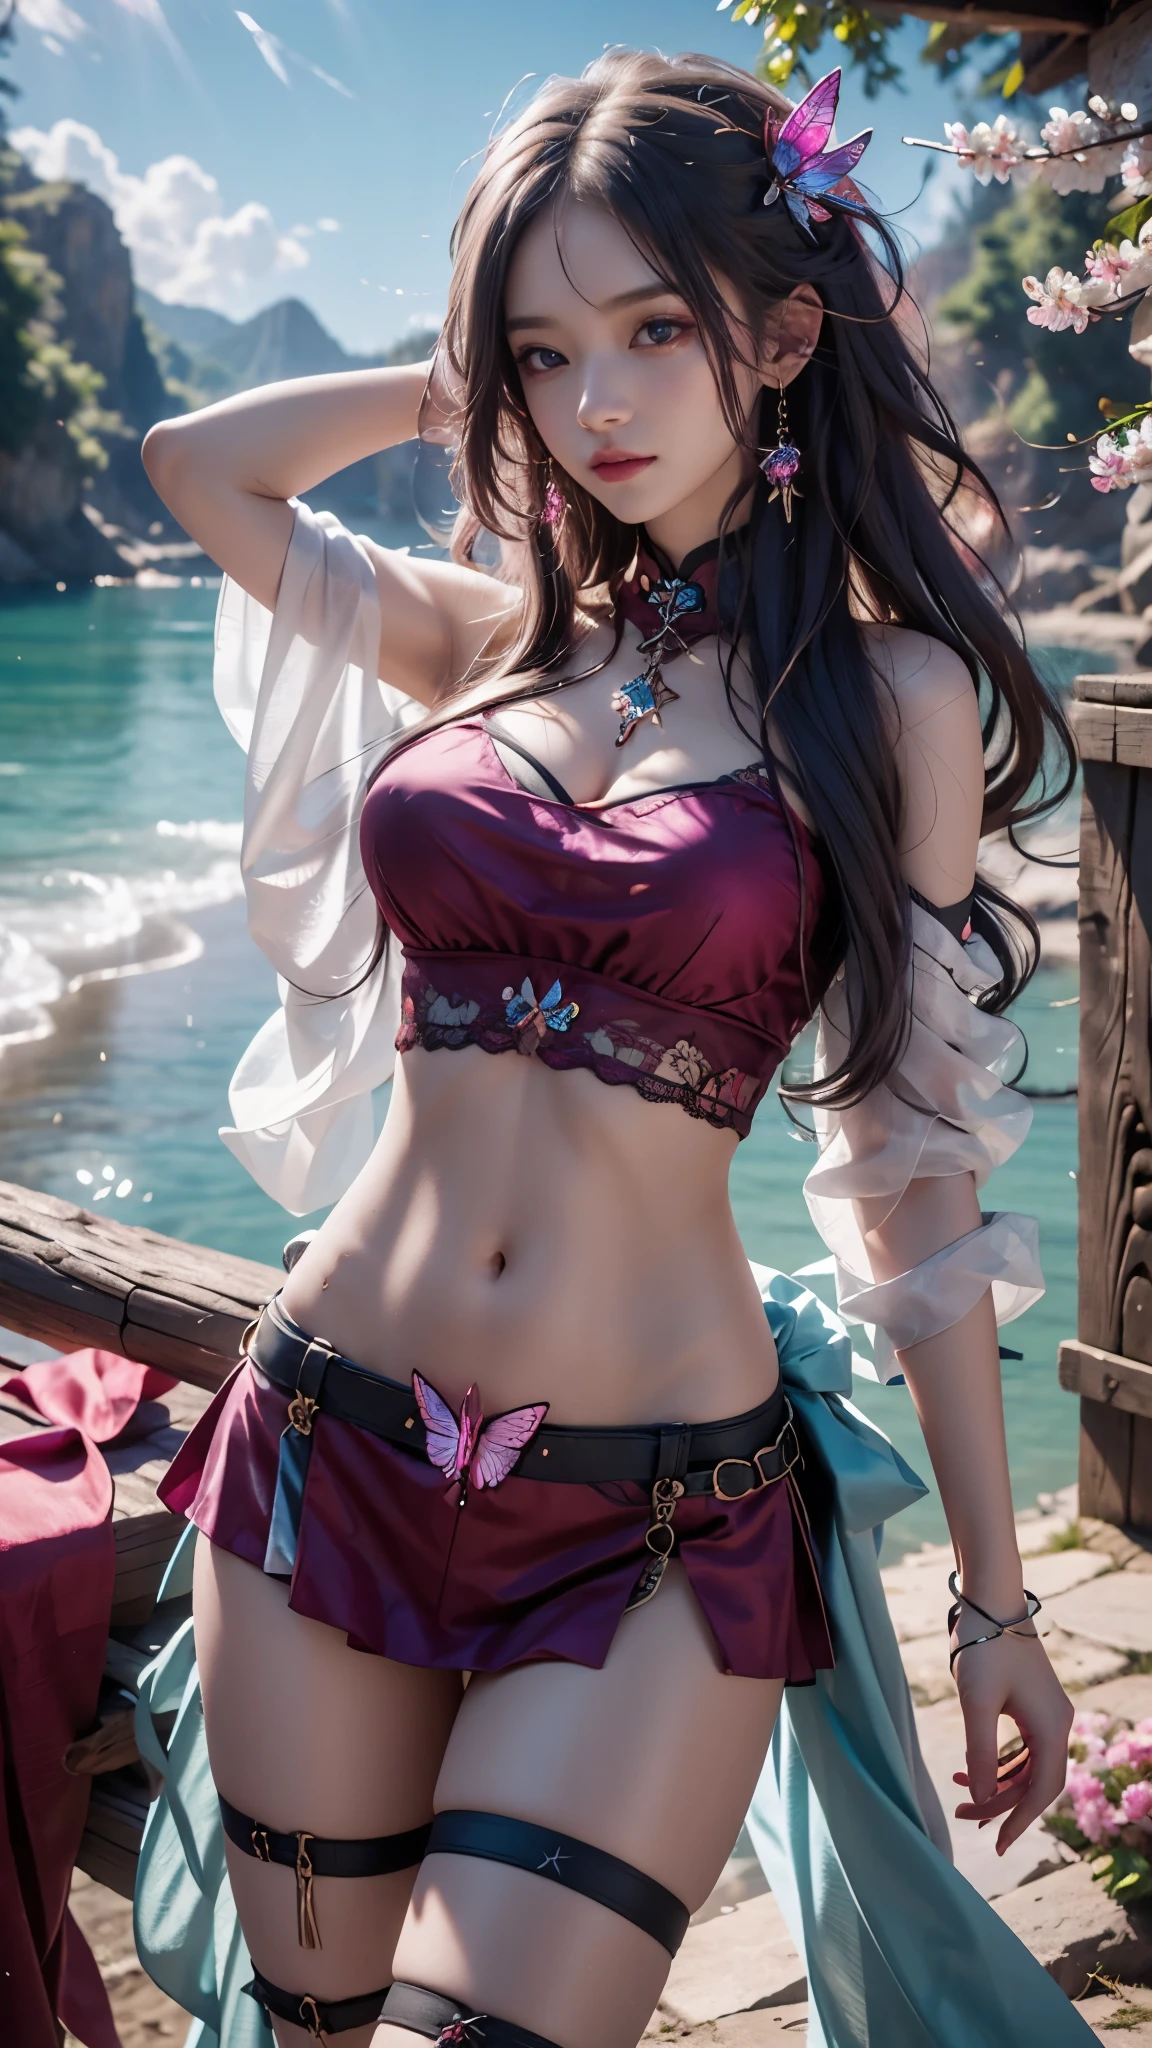 8K, ultra hd, masterpiece, hd colors, 1 girl, perfect face, very long curly hair, detailed eyes, simple clothing, ((magenta clothing)), stocking, ((cryzada stomach lace)), sardine, straps, net clothing, loops, jwellery, waterside, Realistic scenery, epic scenery, sun rising, evening, clouds, Butterfly, cherry blossom, blowing wind, perfect pose,